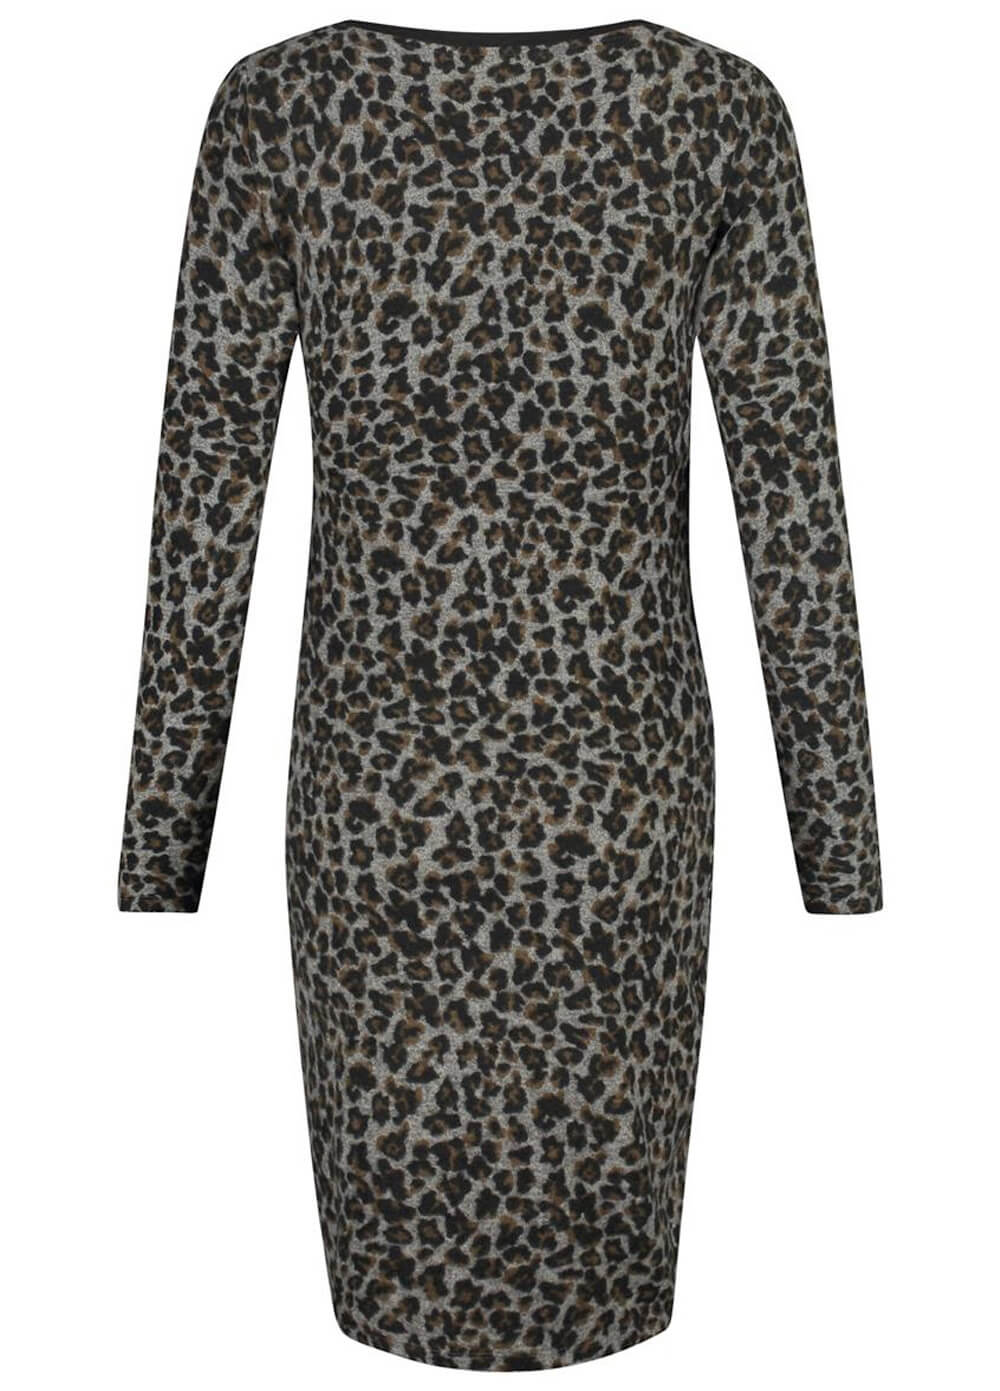 Grey Leopard Print Maternity Dress by Noppies